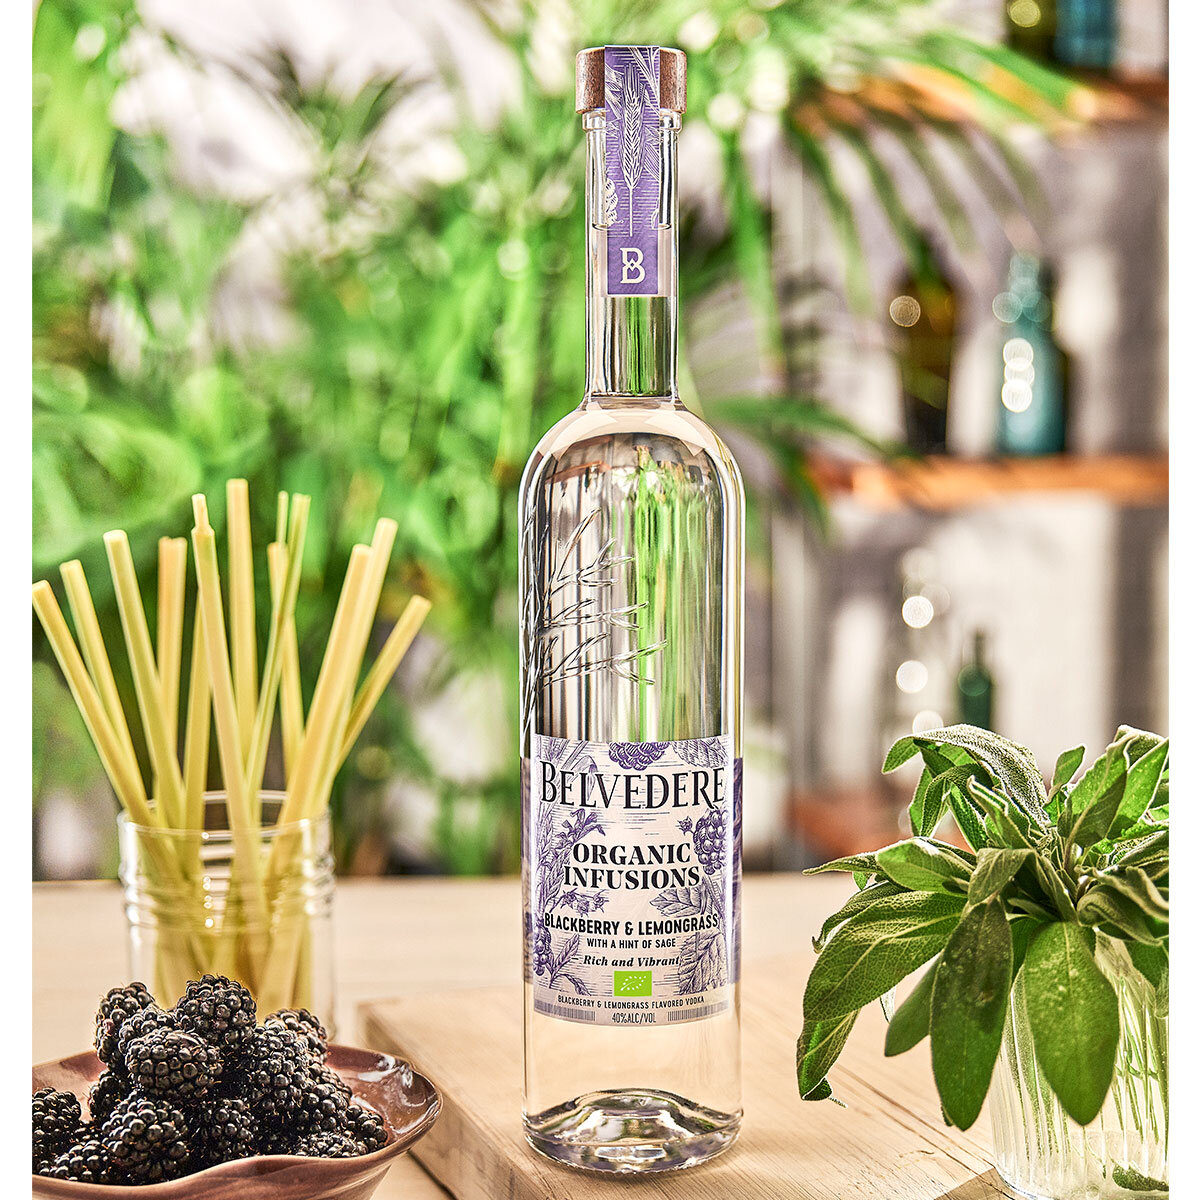 Image of bottle of Belvedere Infusions